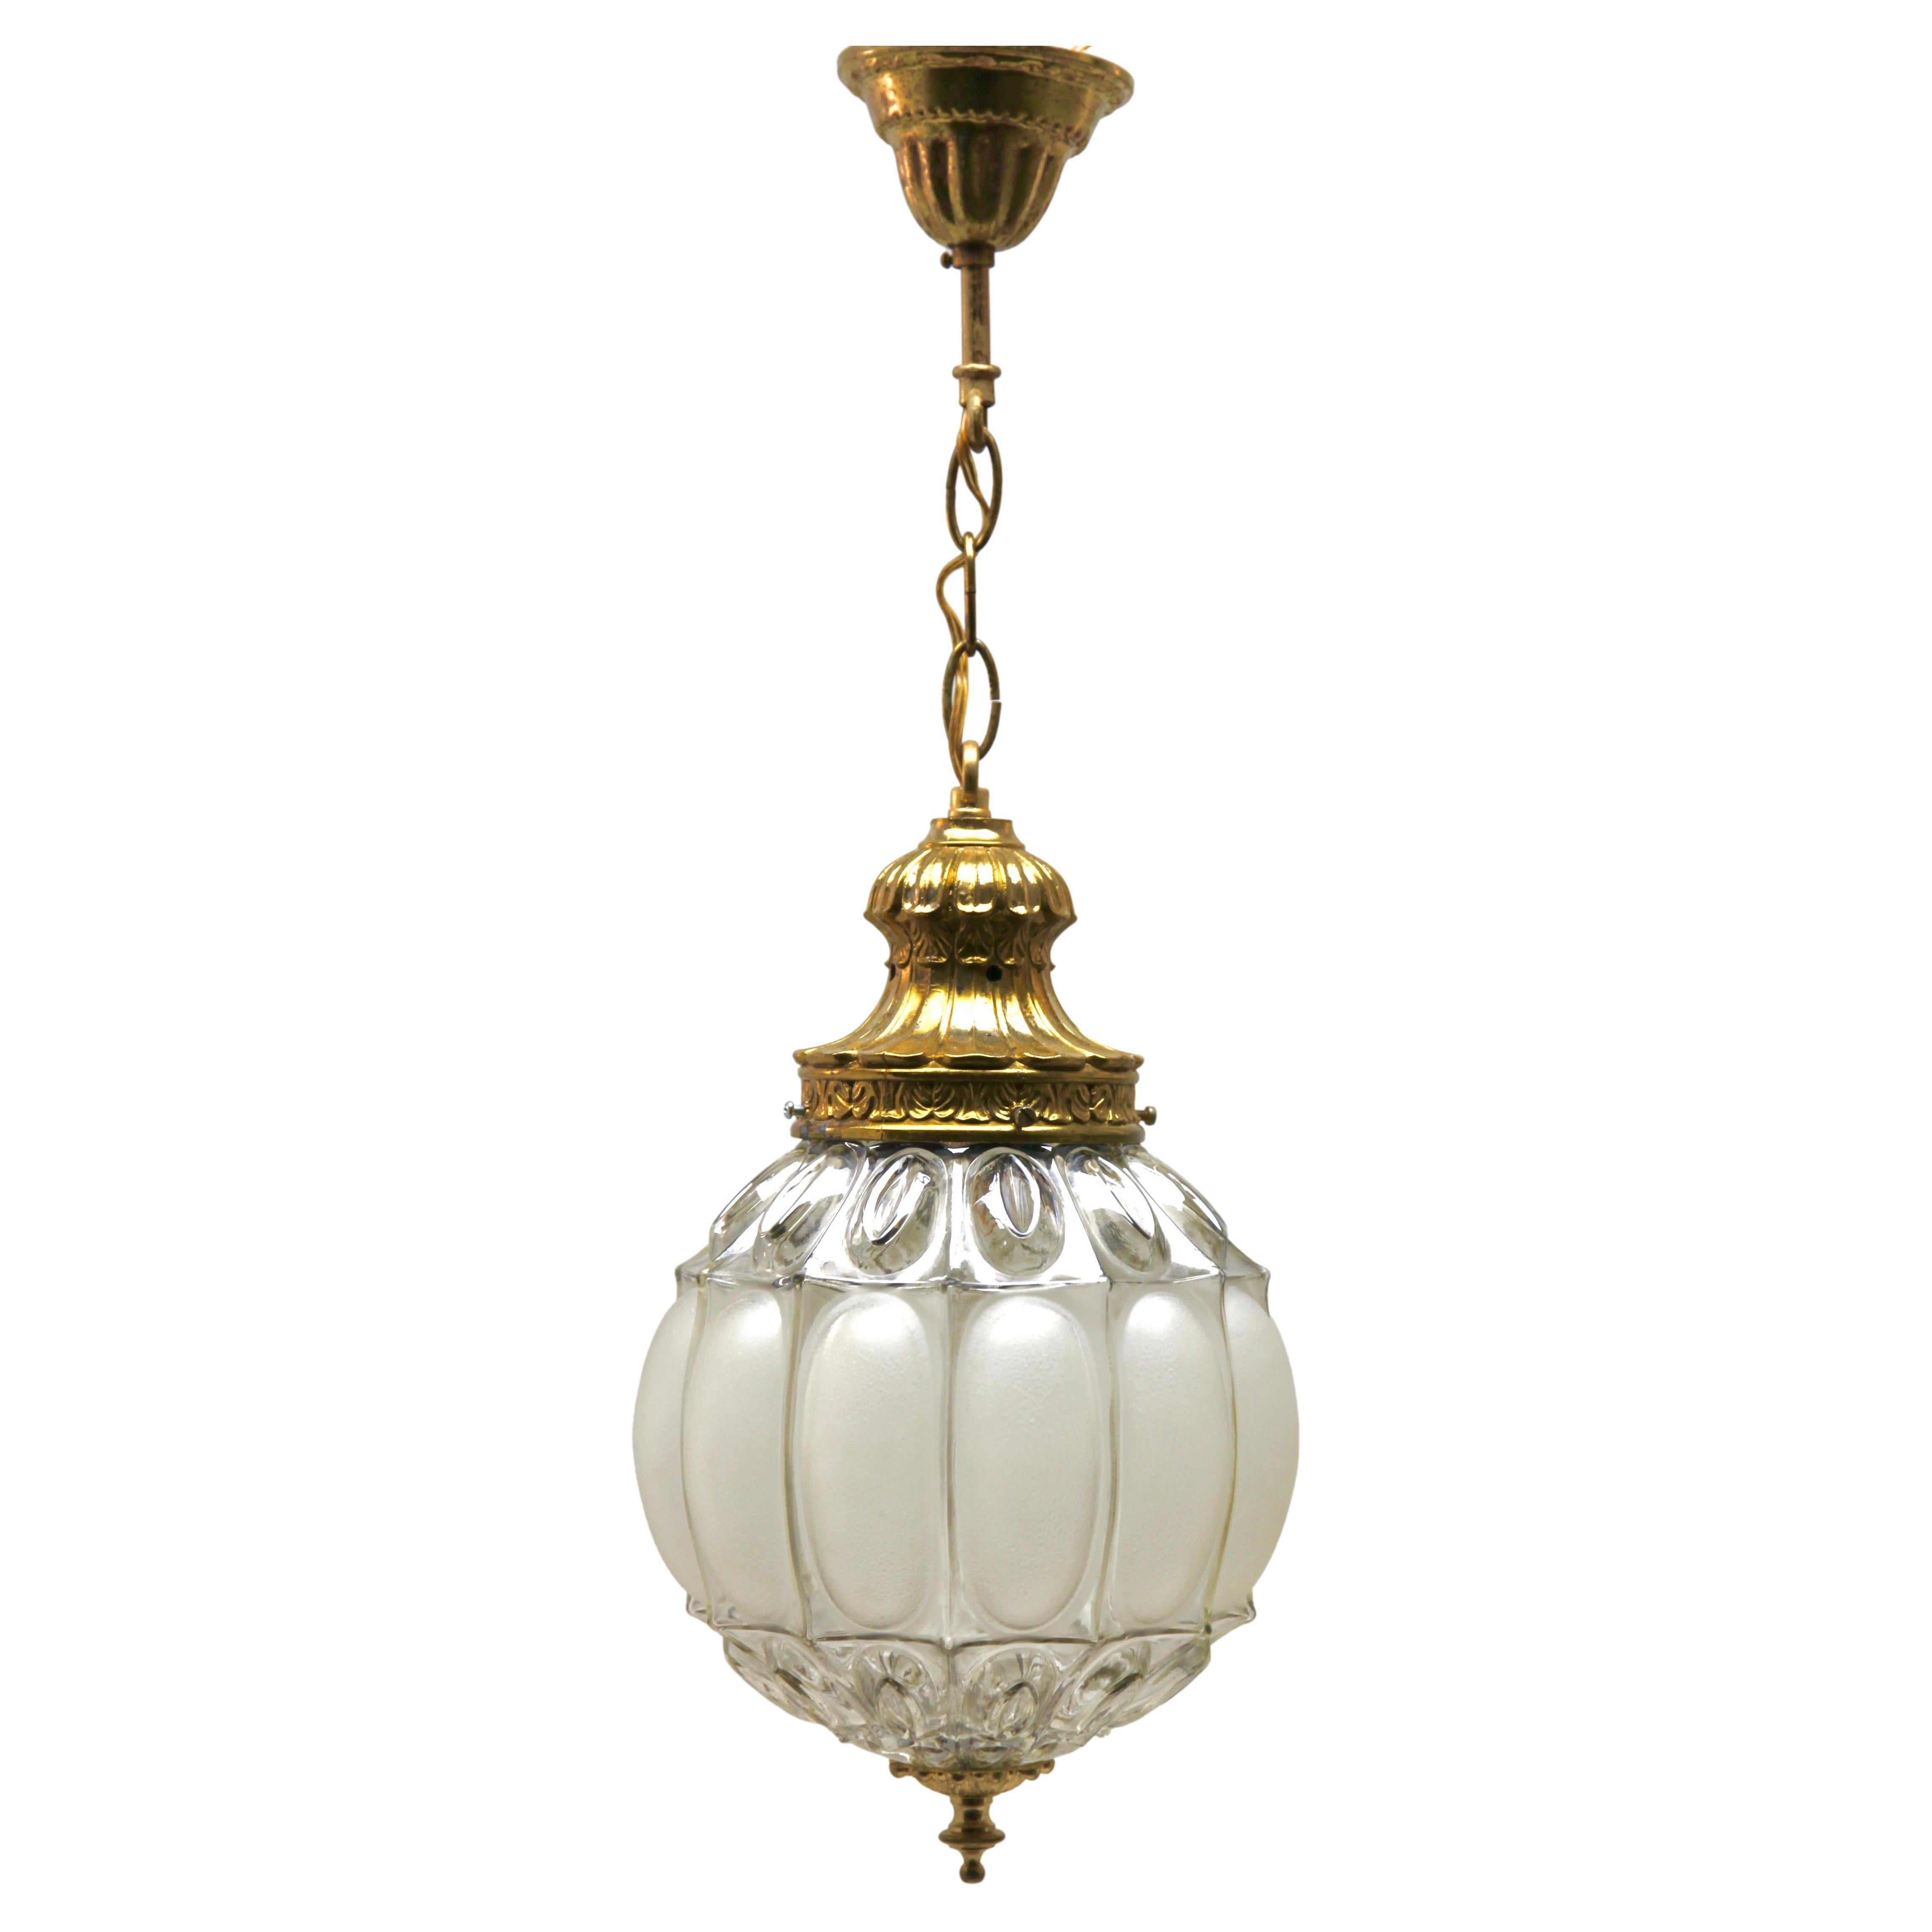 Bubble pendant by Glashütte Limburg during Helena Tyrell Era, 1960s

In excellent condition and in full working order having 
With original patina on brass parts.
Lamp total height 22.83 inches
Size: Glass shade height 9.44 inches, diameter